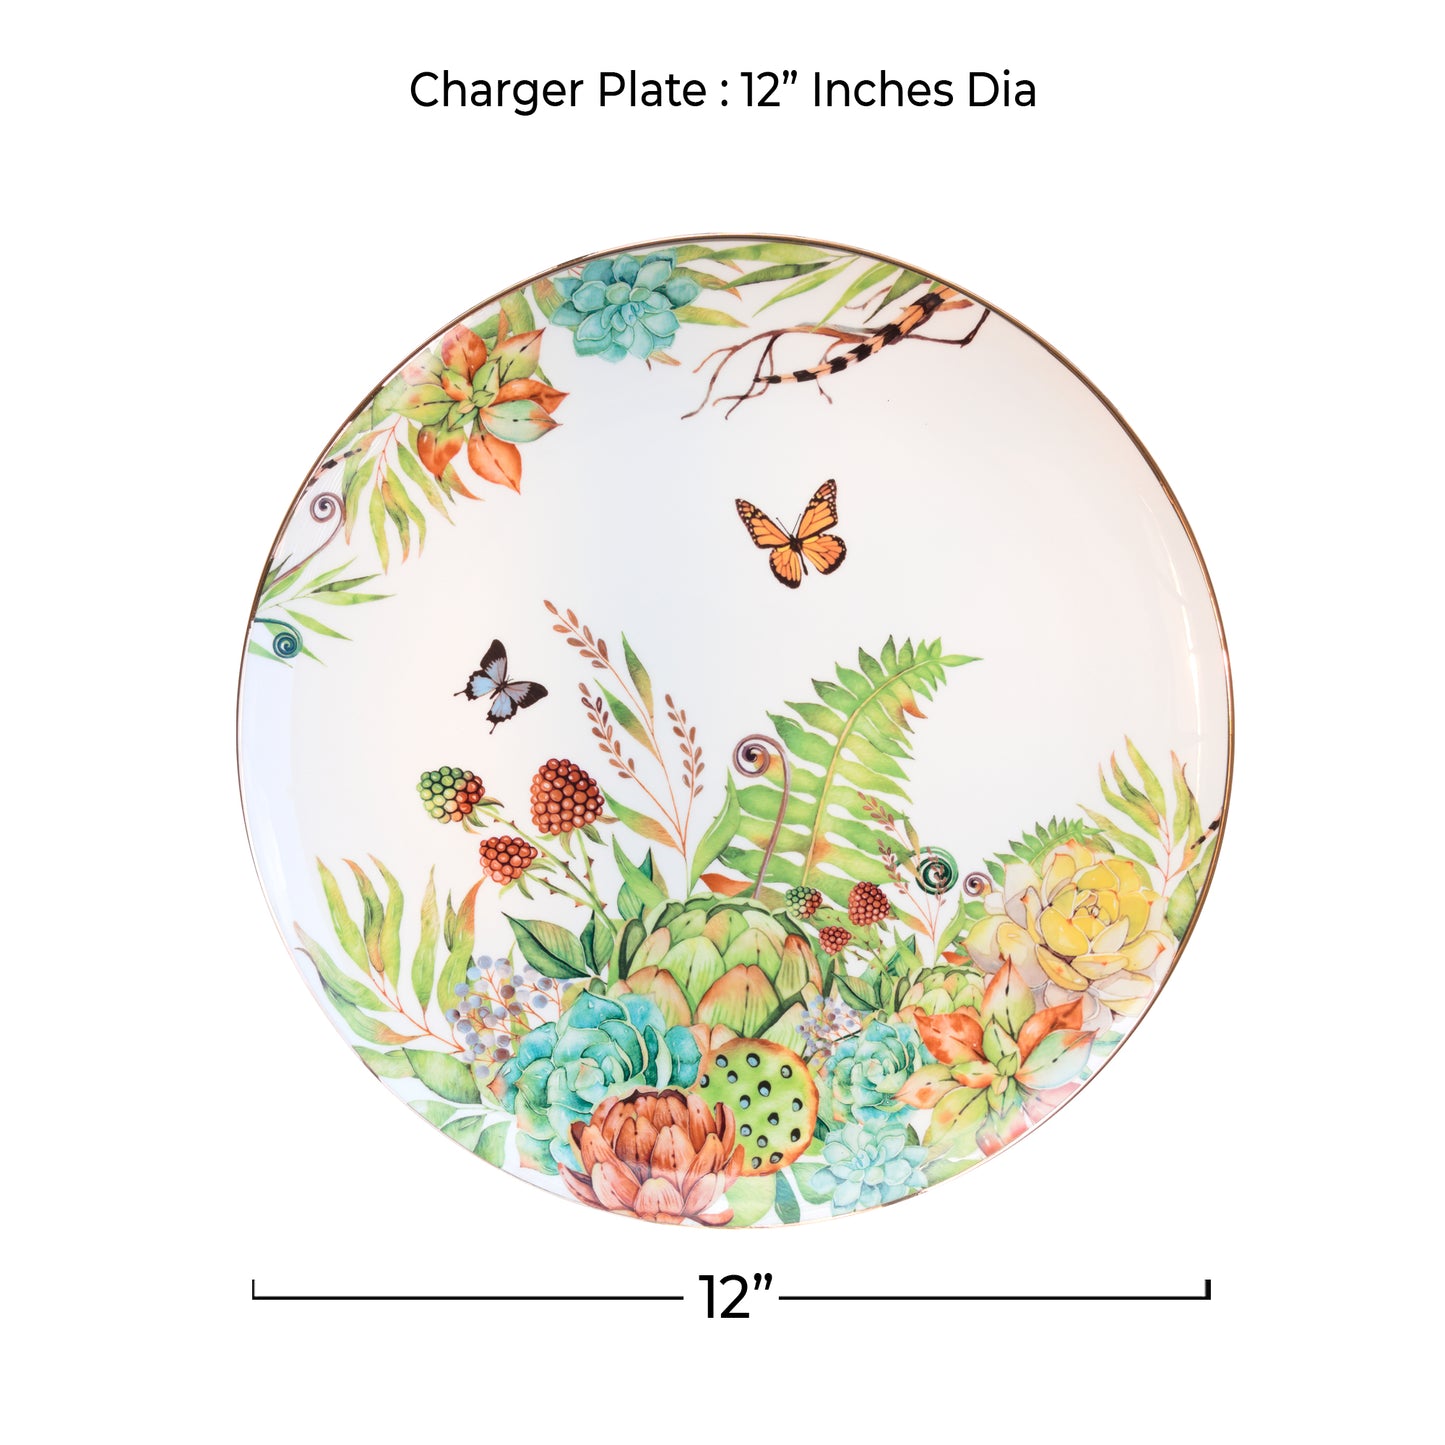 Viridis Forest Green Charger Plate (12 inches)